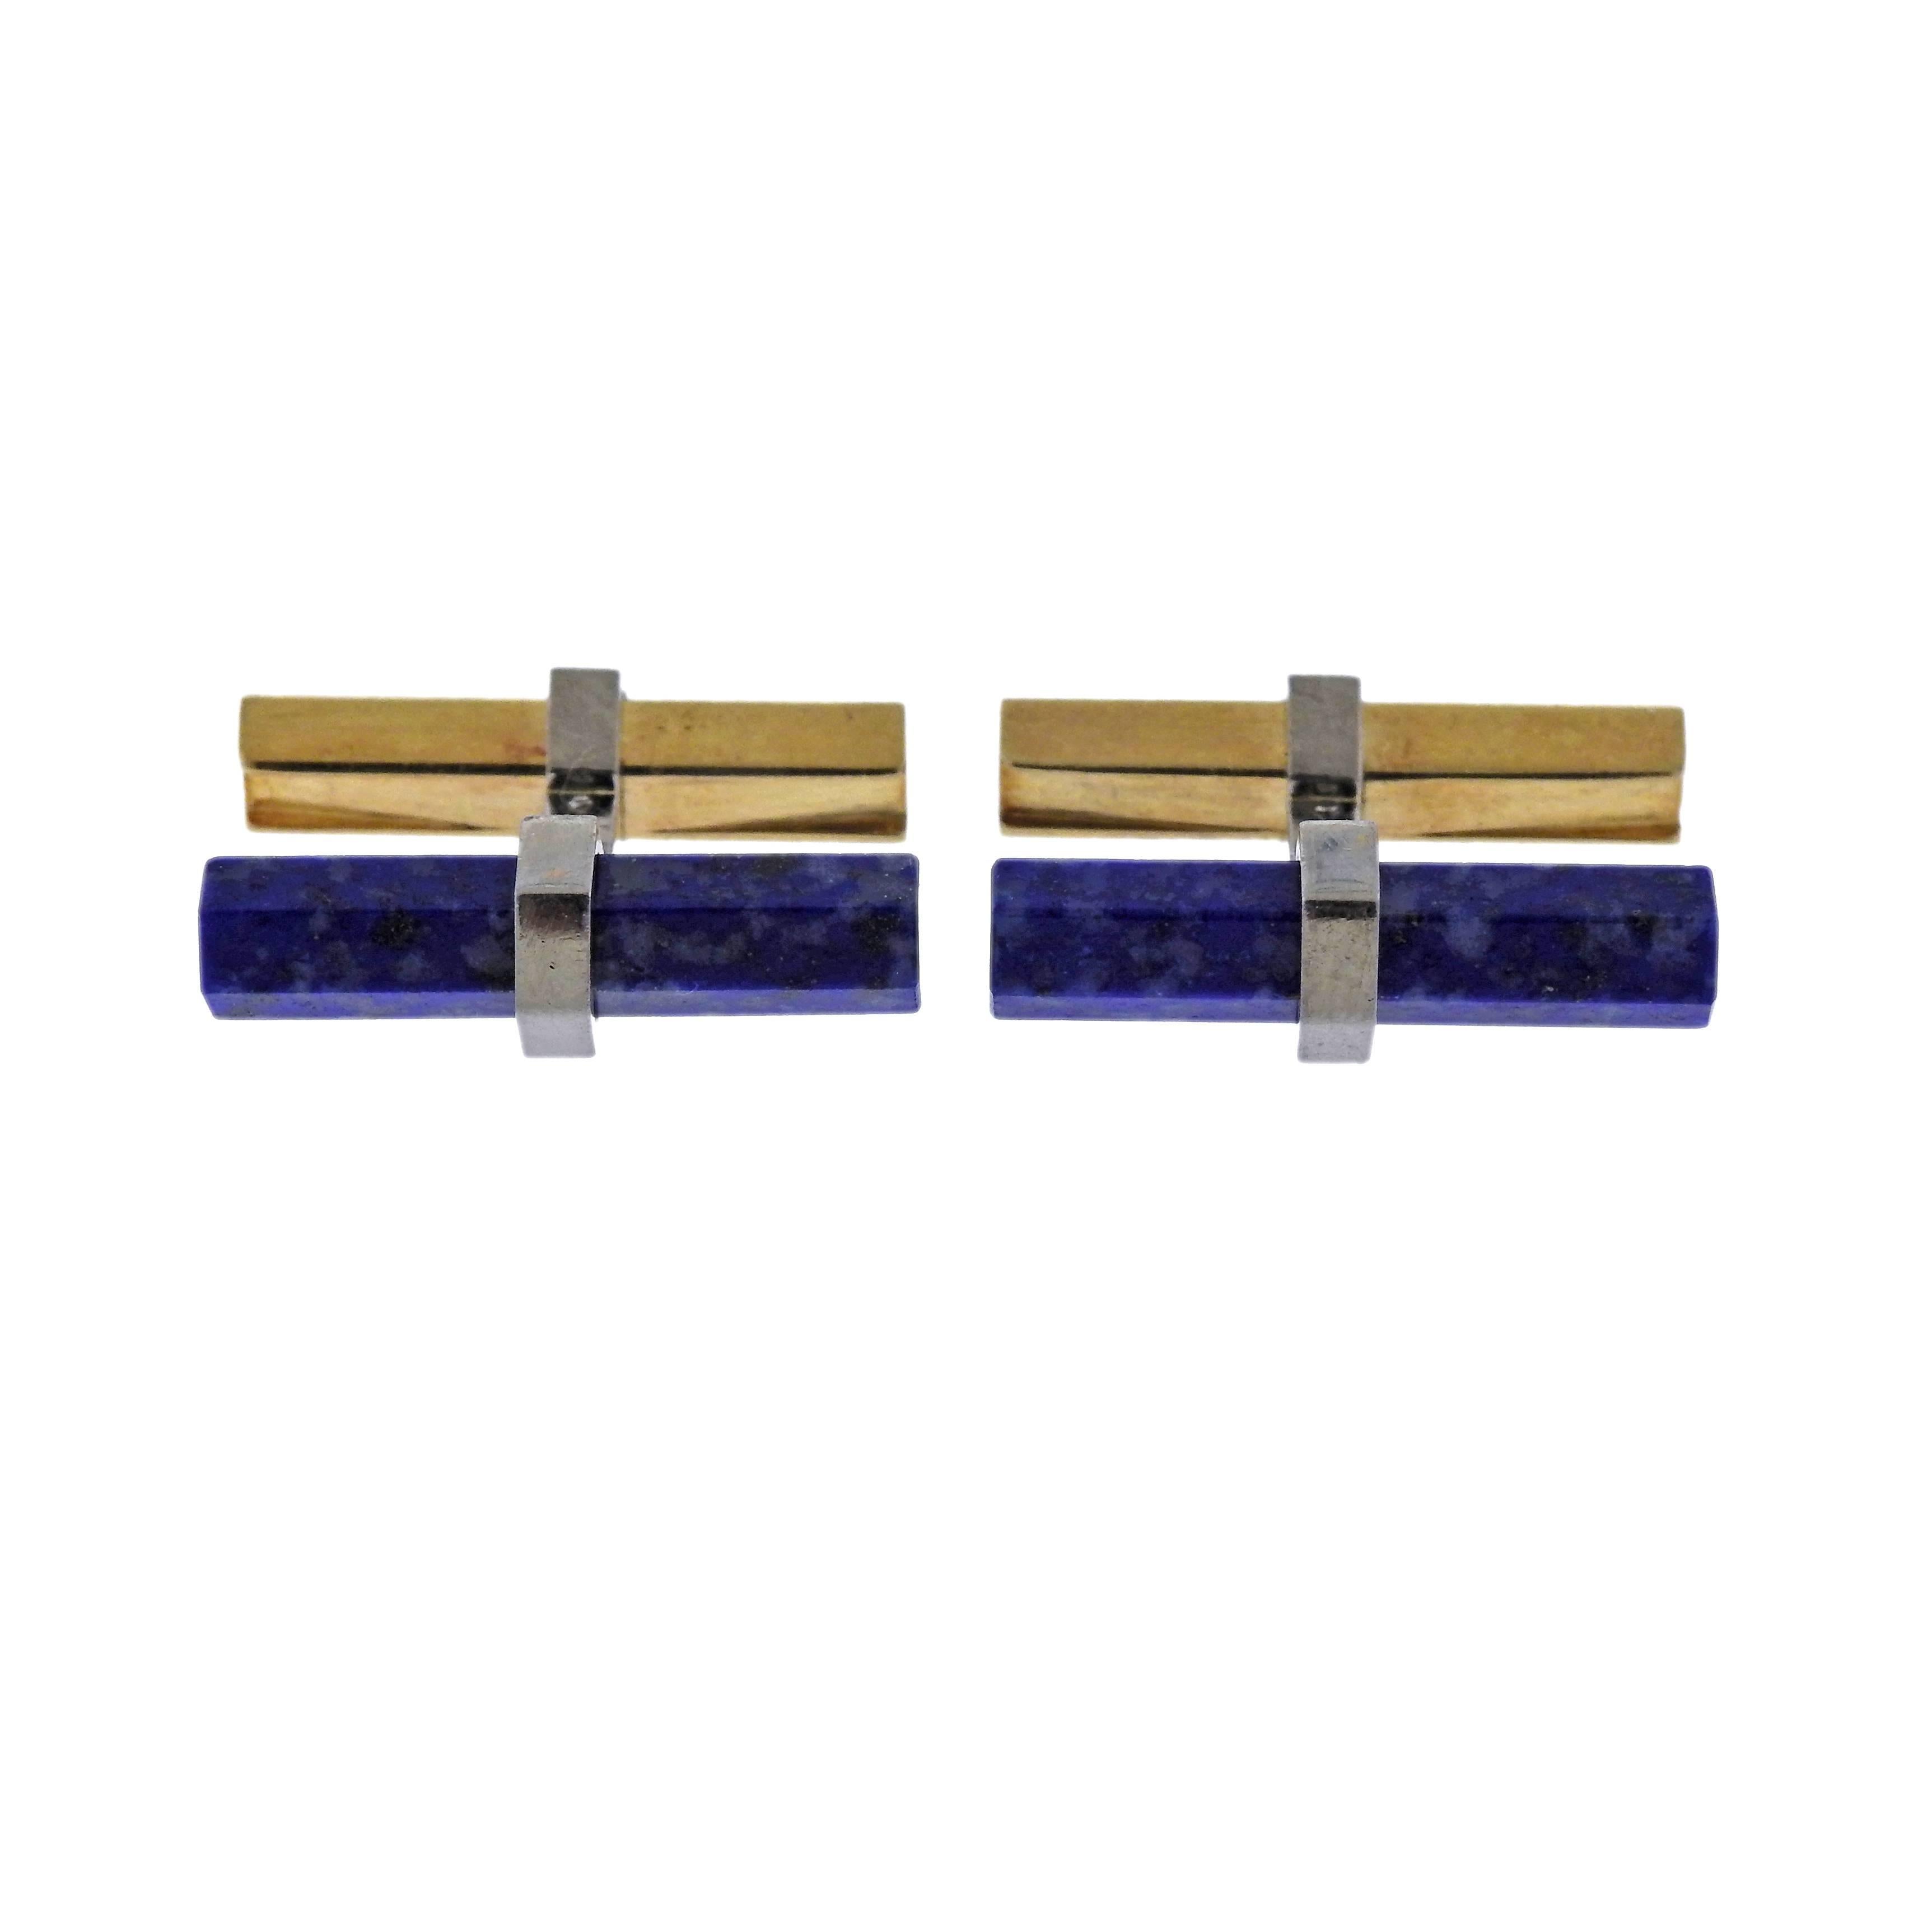 Pair of classic 18k gold bar cufflinks, decorated with lapis lazuli, crafted by Cartier. Each bar measurs 24mm x 5mm, weigh 12.1 grams. Marked: Cartier, 36781, 750.